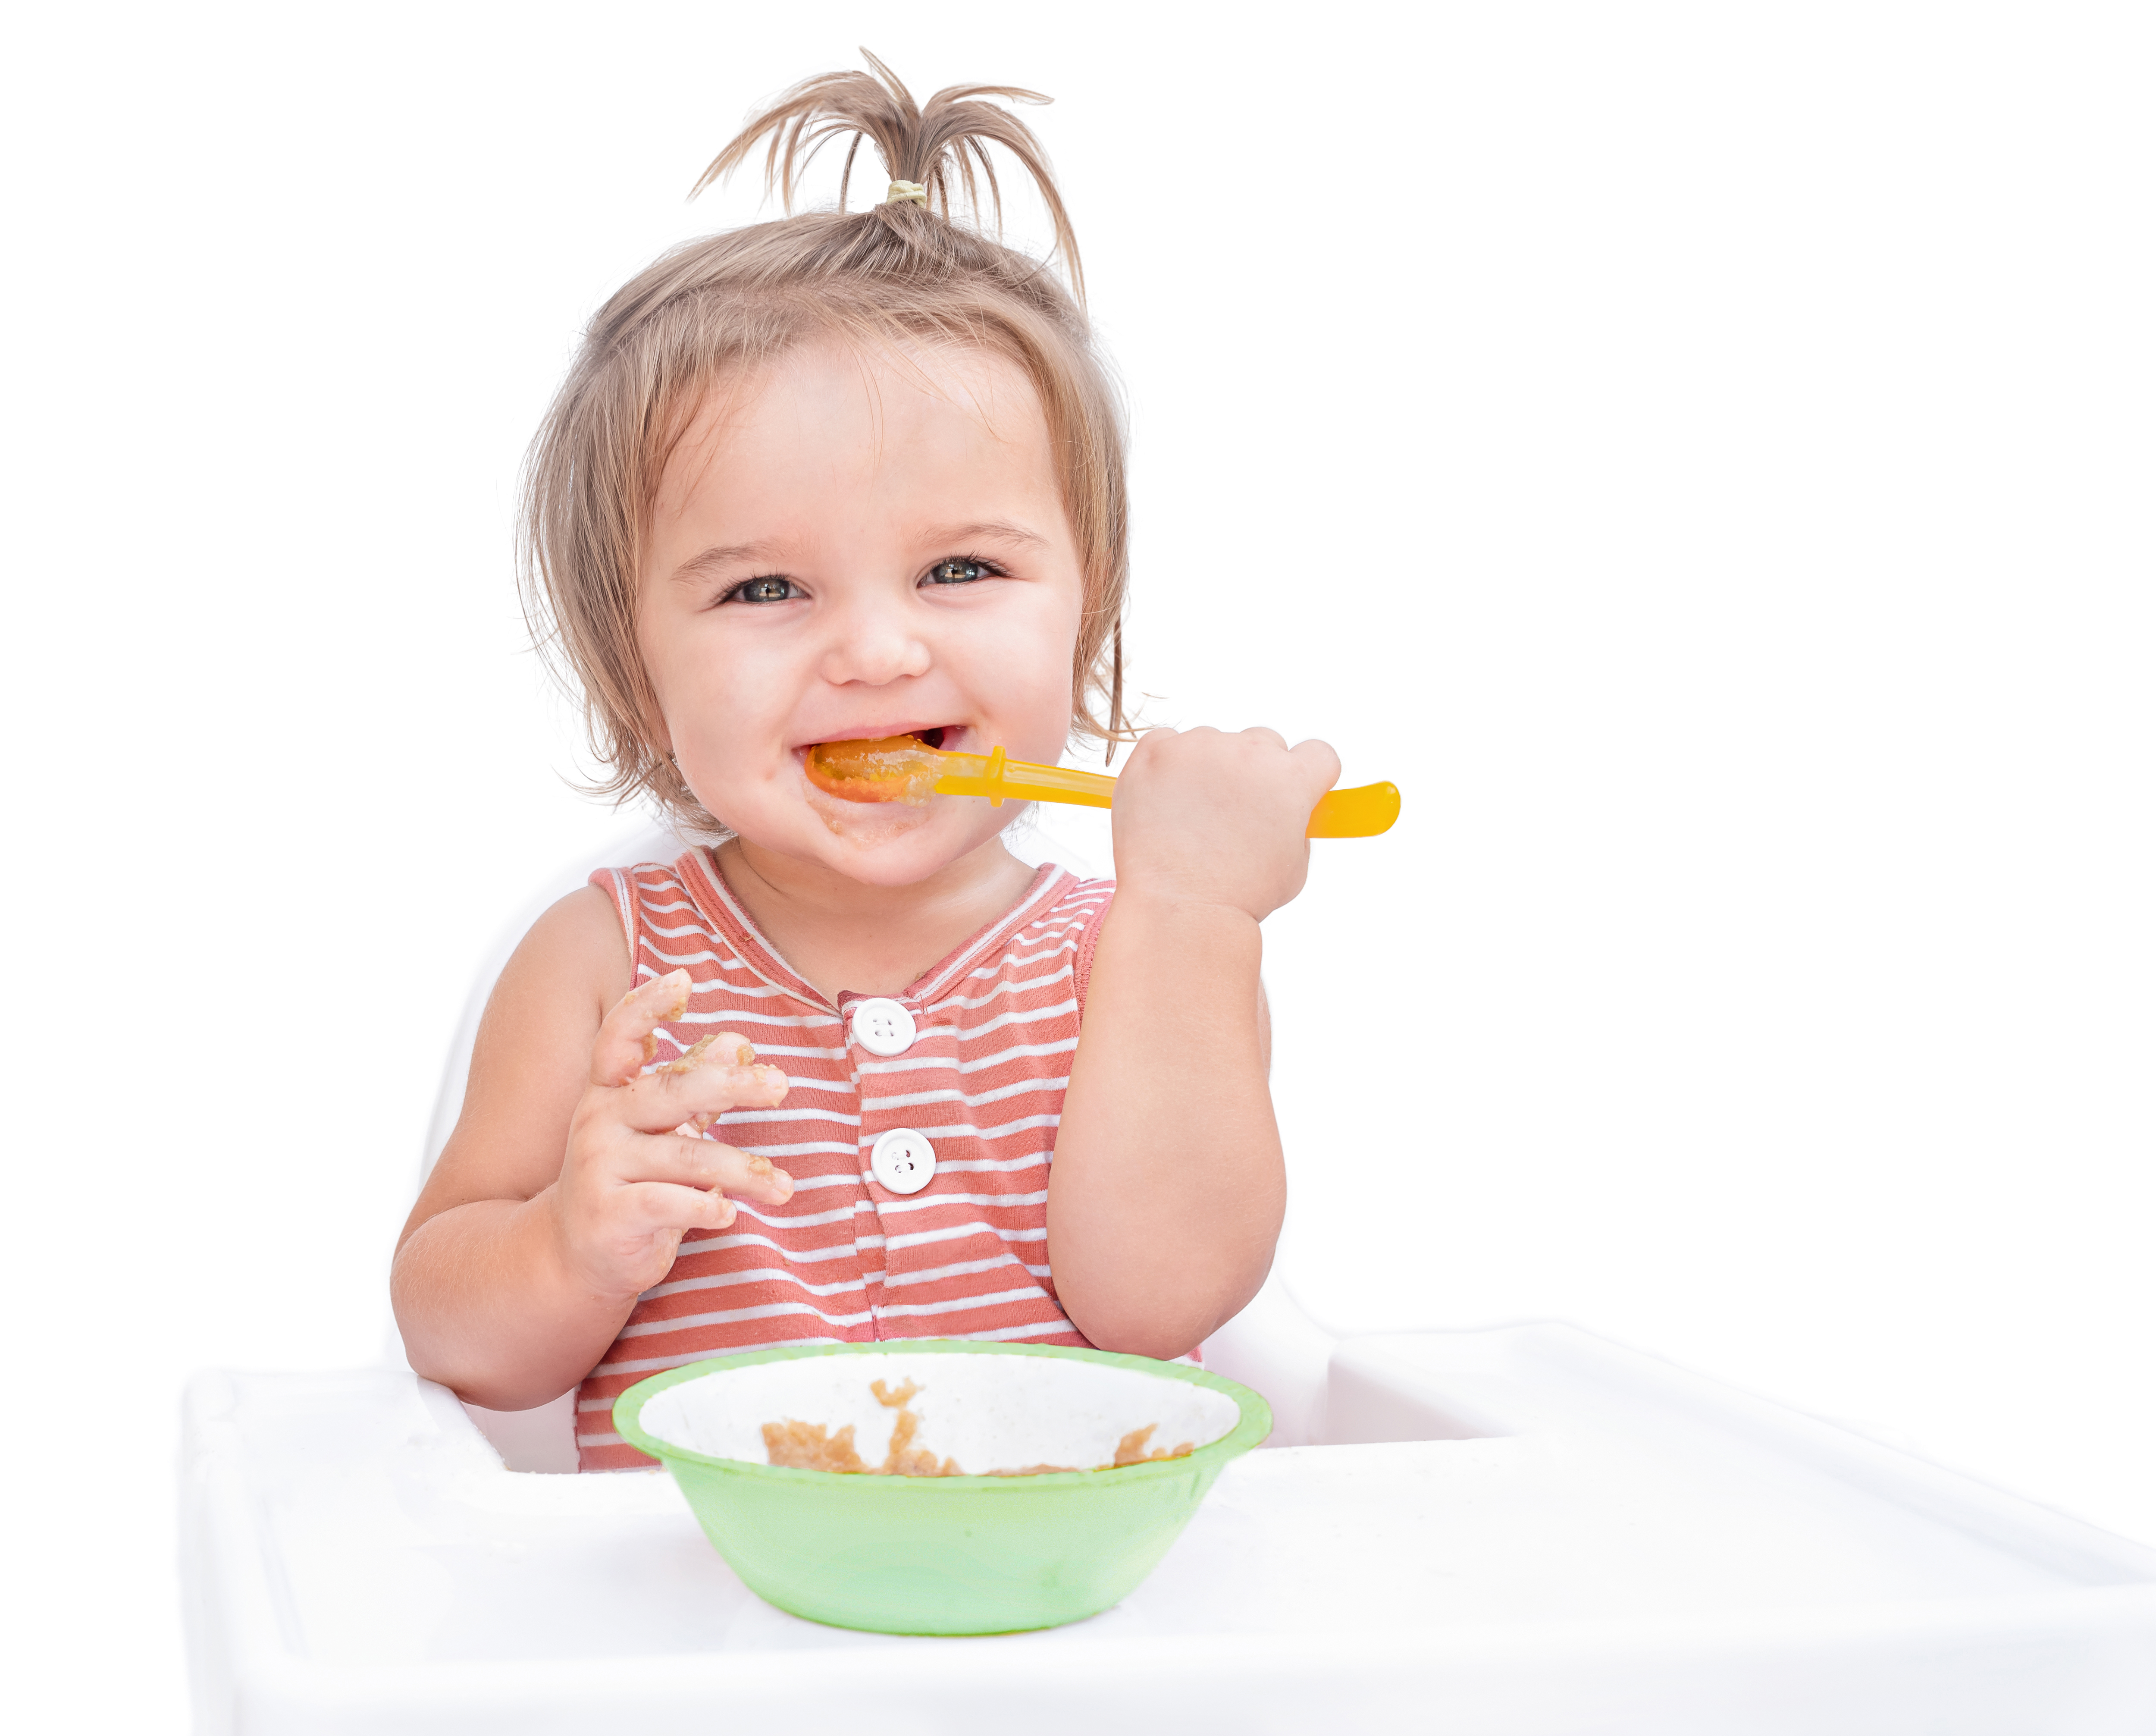 Infant and Child Nutrition: safe, smart, sustainable